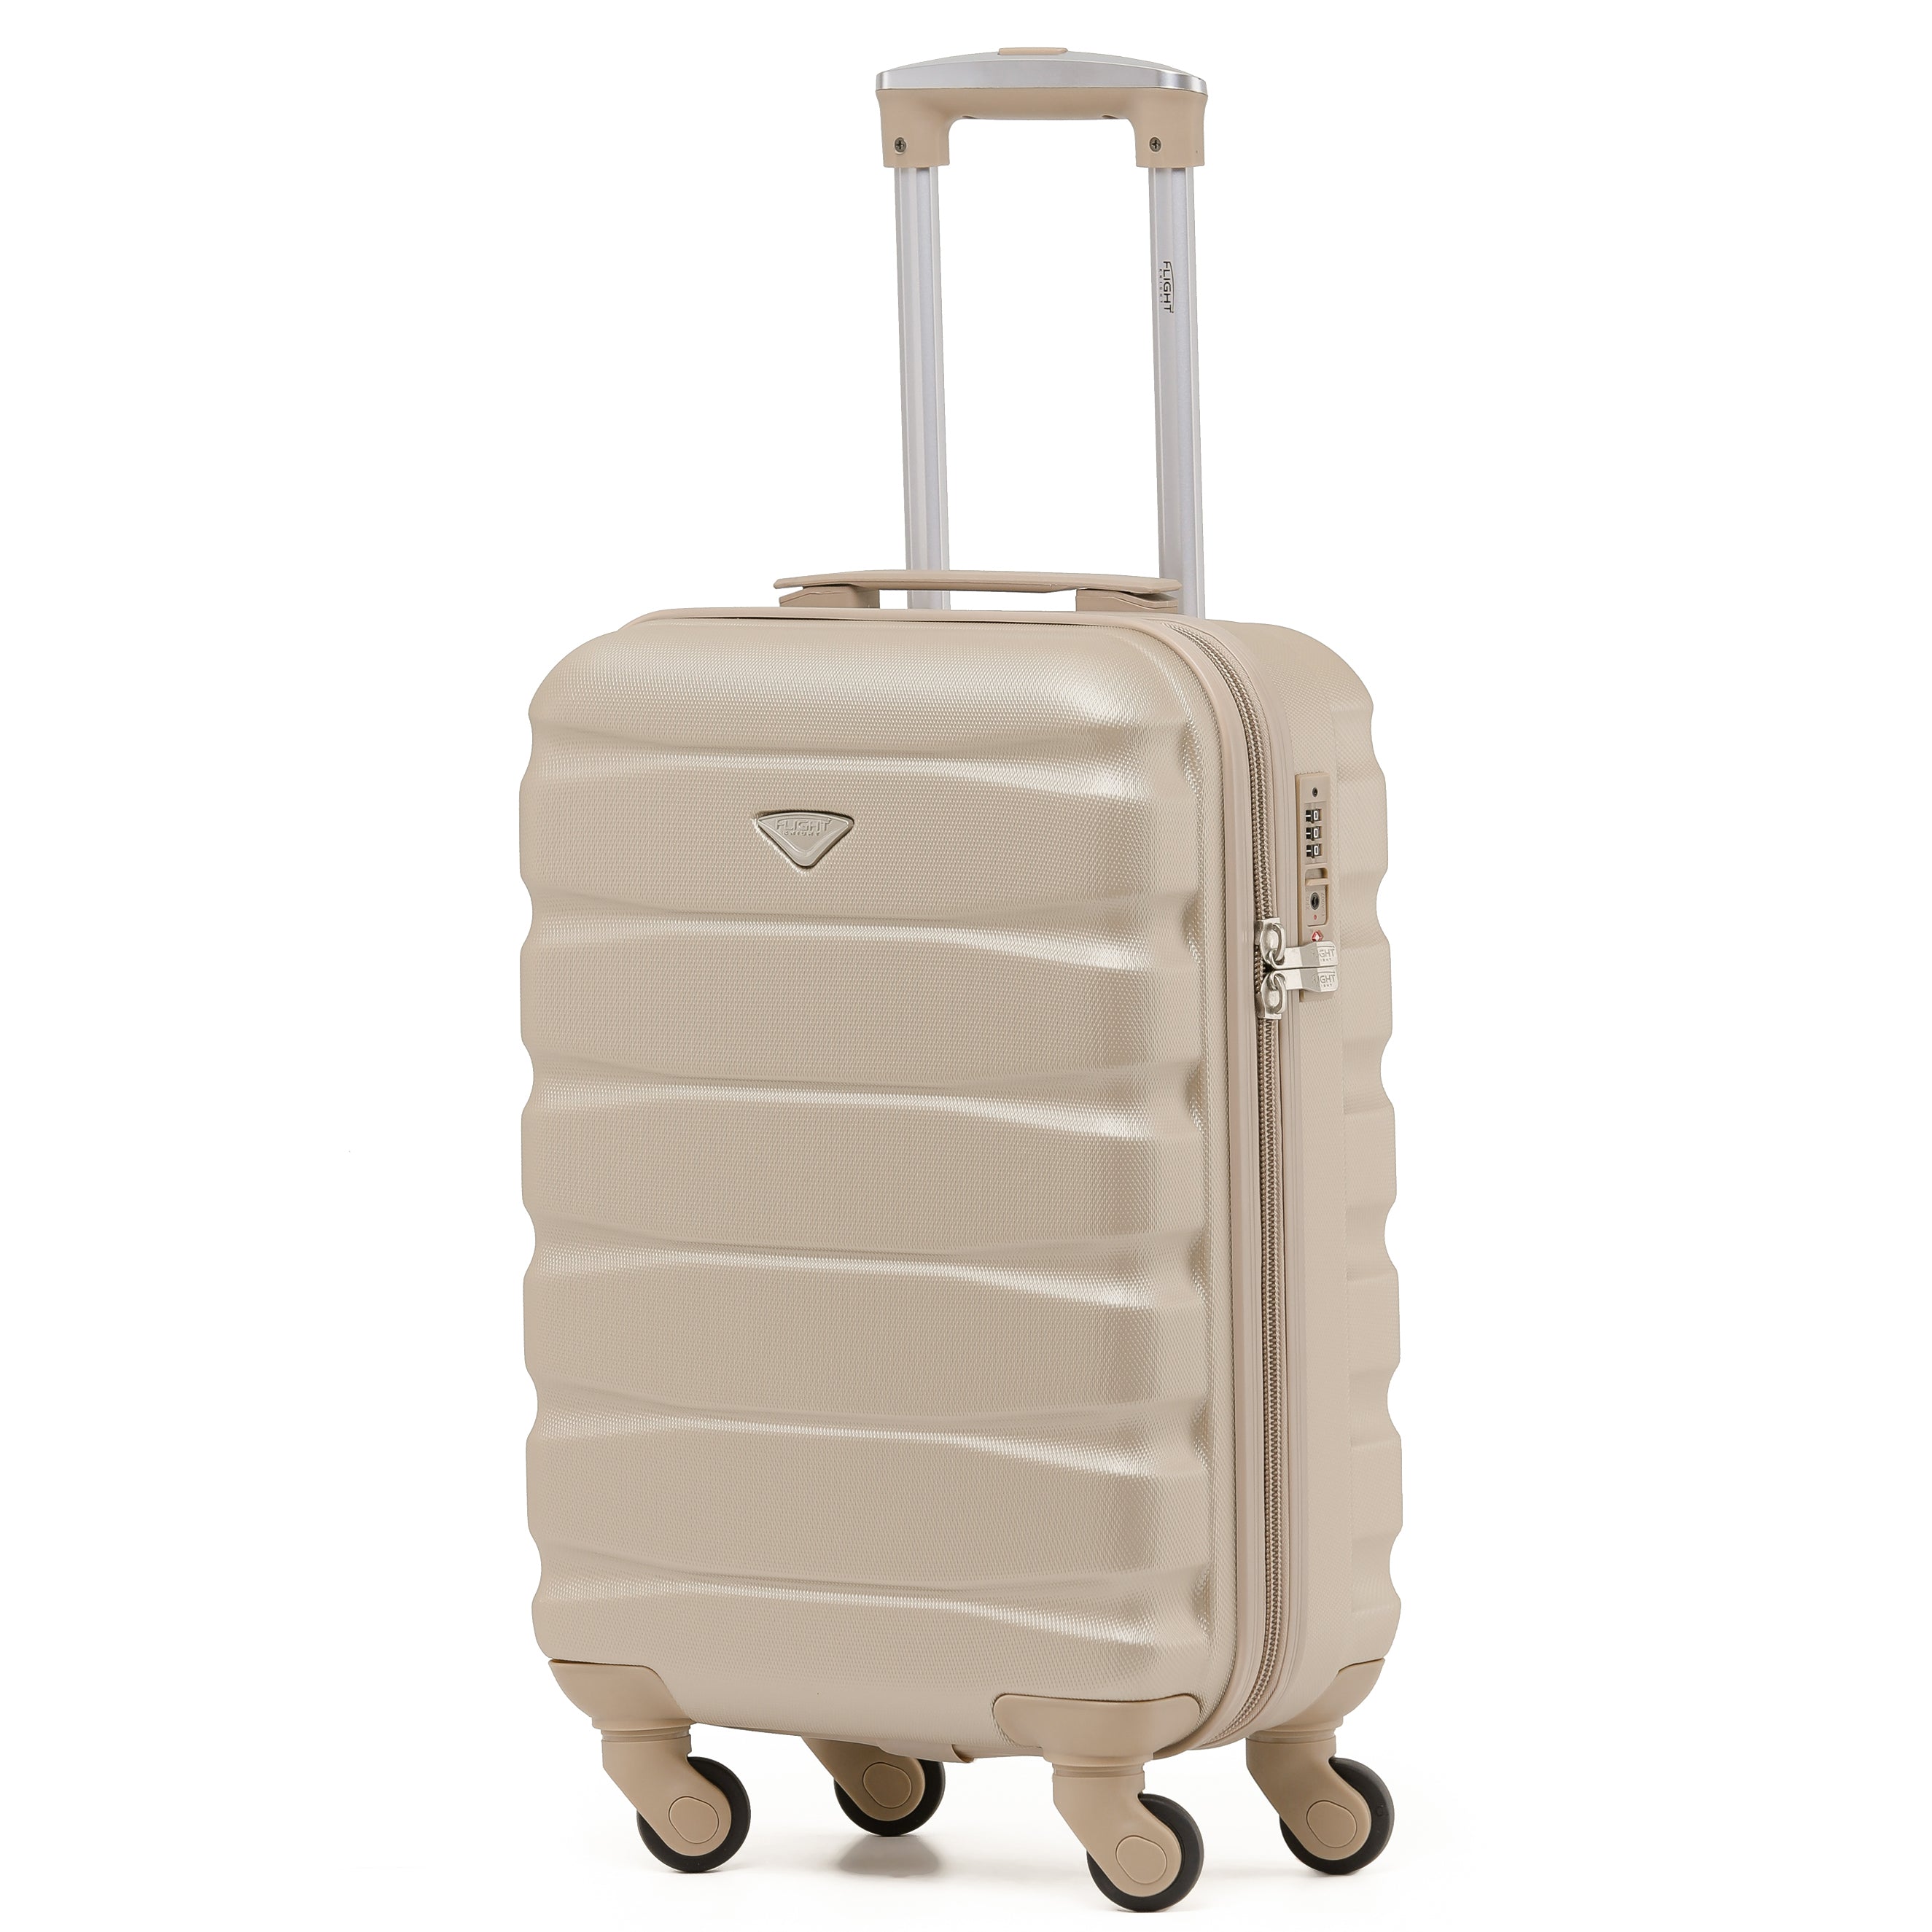 Load image into Gallery viewer, 55x35x20cm TSA Lock Lightweight 4Wheel ABS Hard Cabin Suitcases Carry On Luggage
